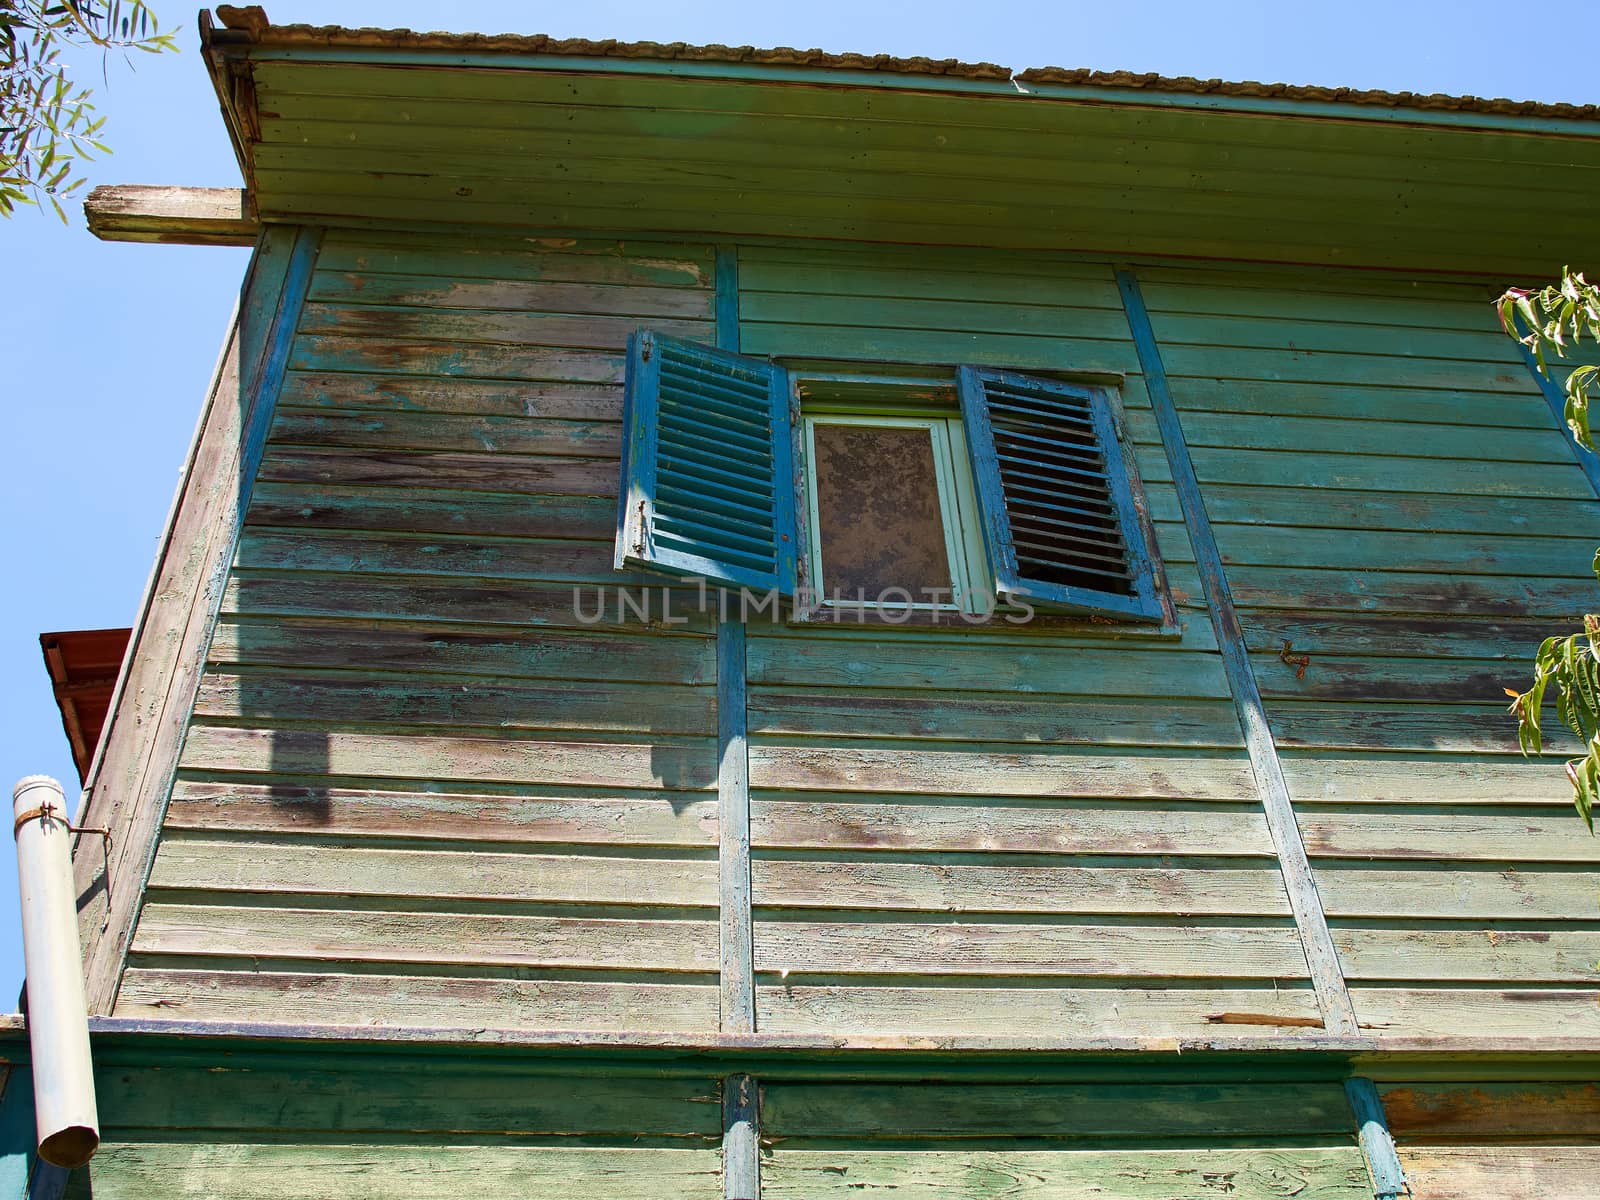 Details of an old weathered abandoned western colonial style wooden house shed